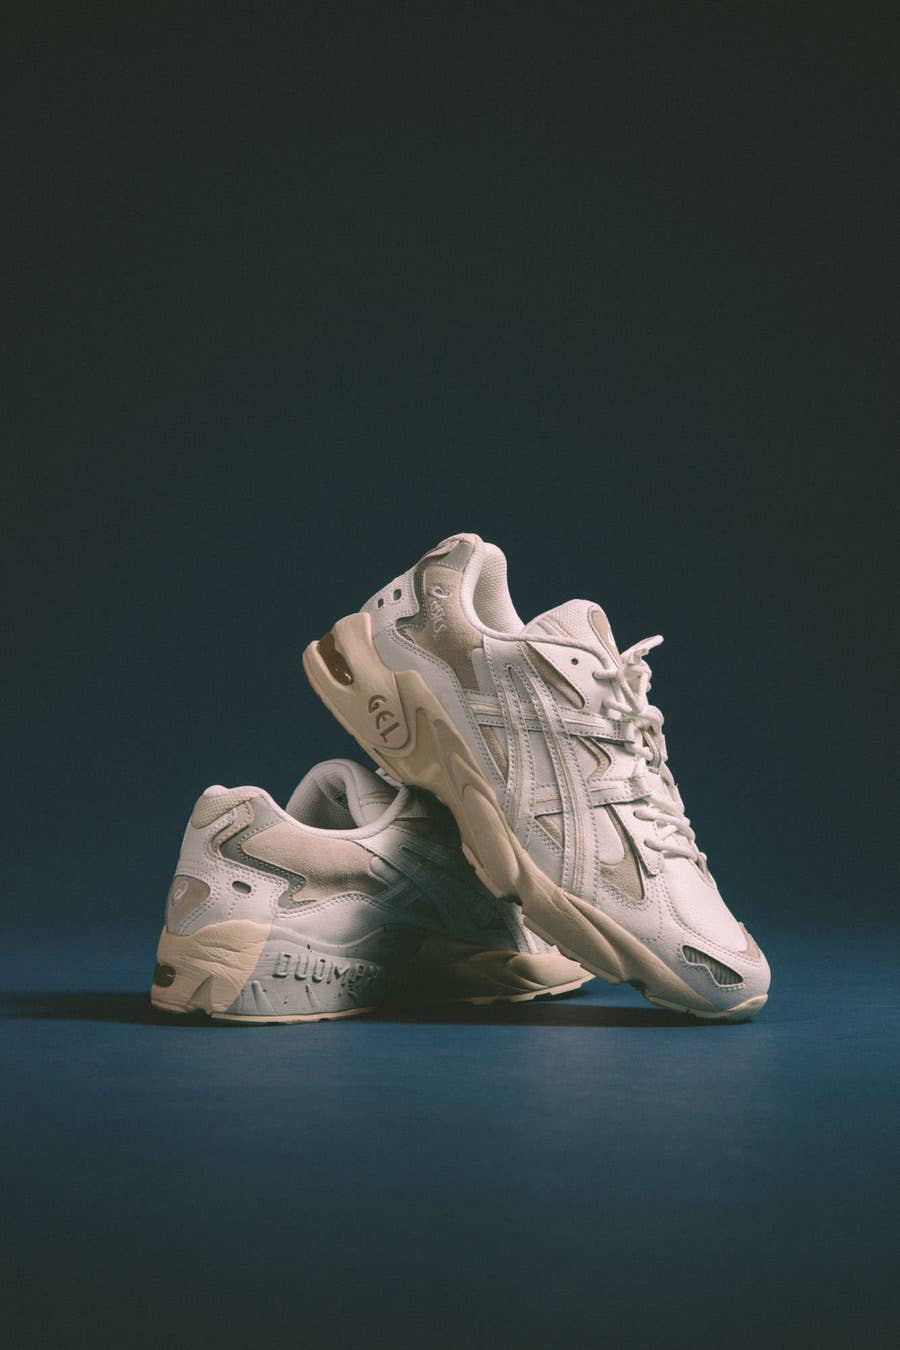 Slip Into Luxury With The Asics Gel-Kayano 5 Og Leather Pack | Complex